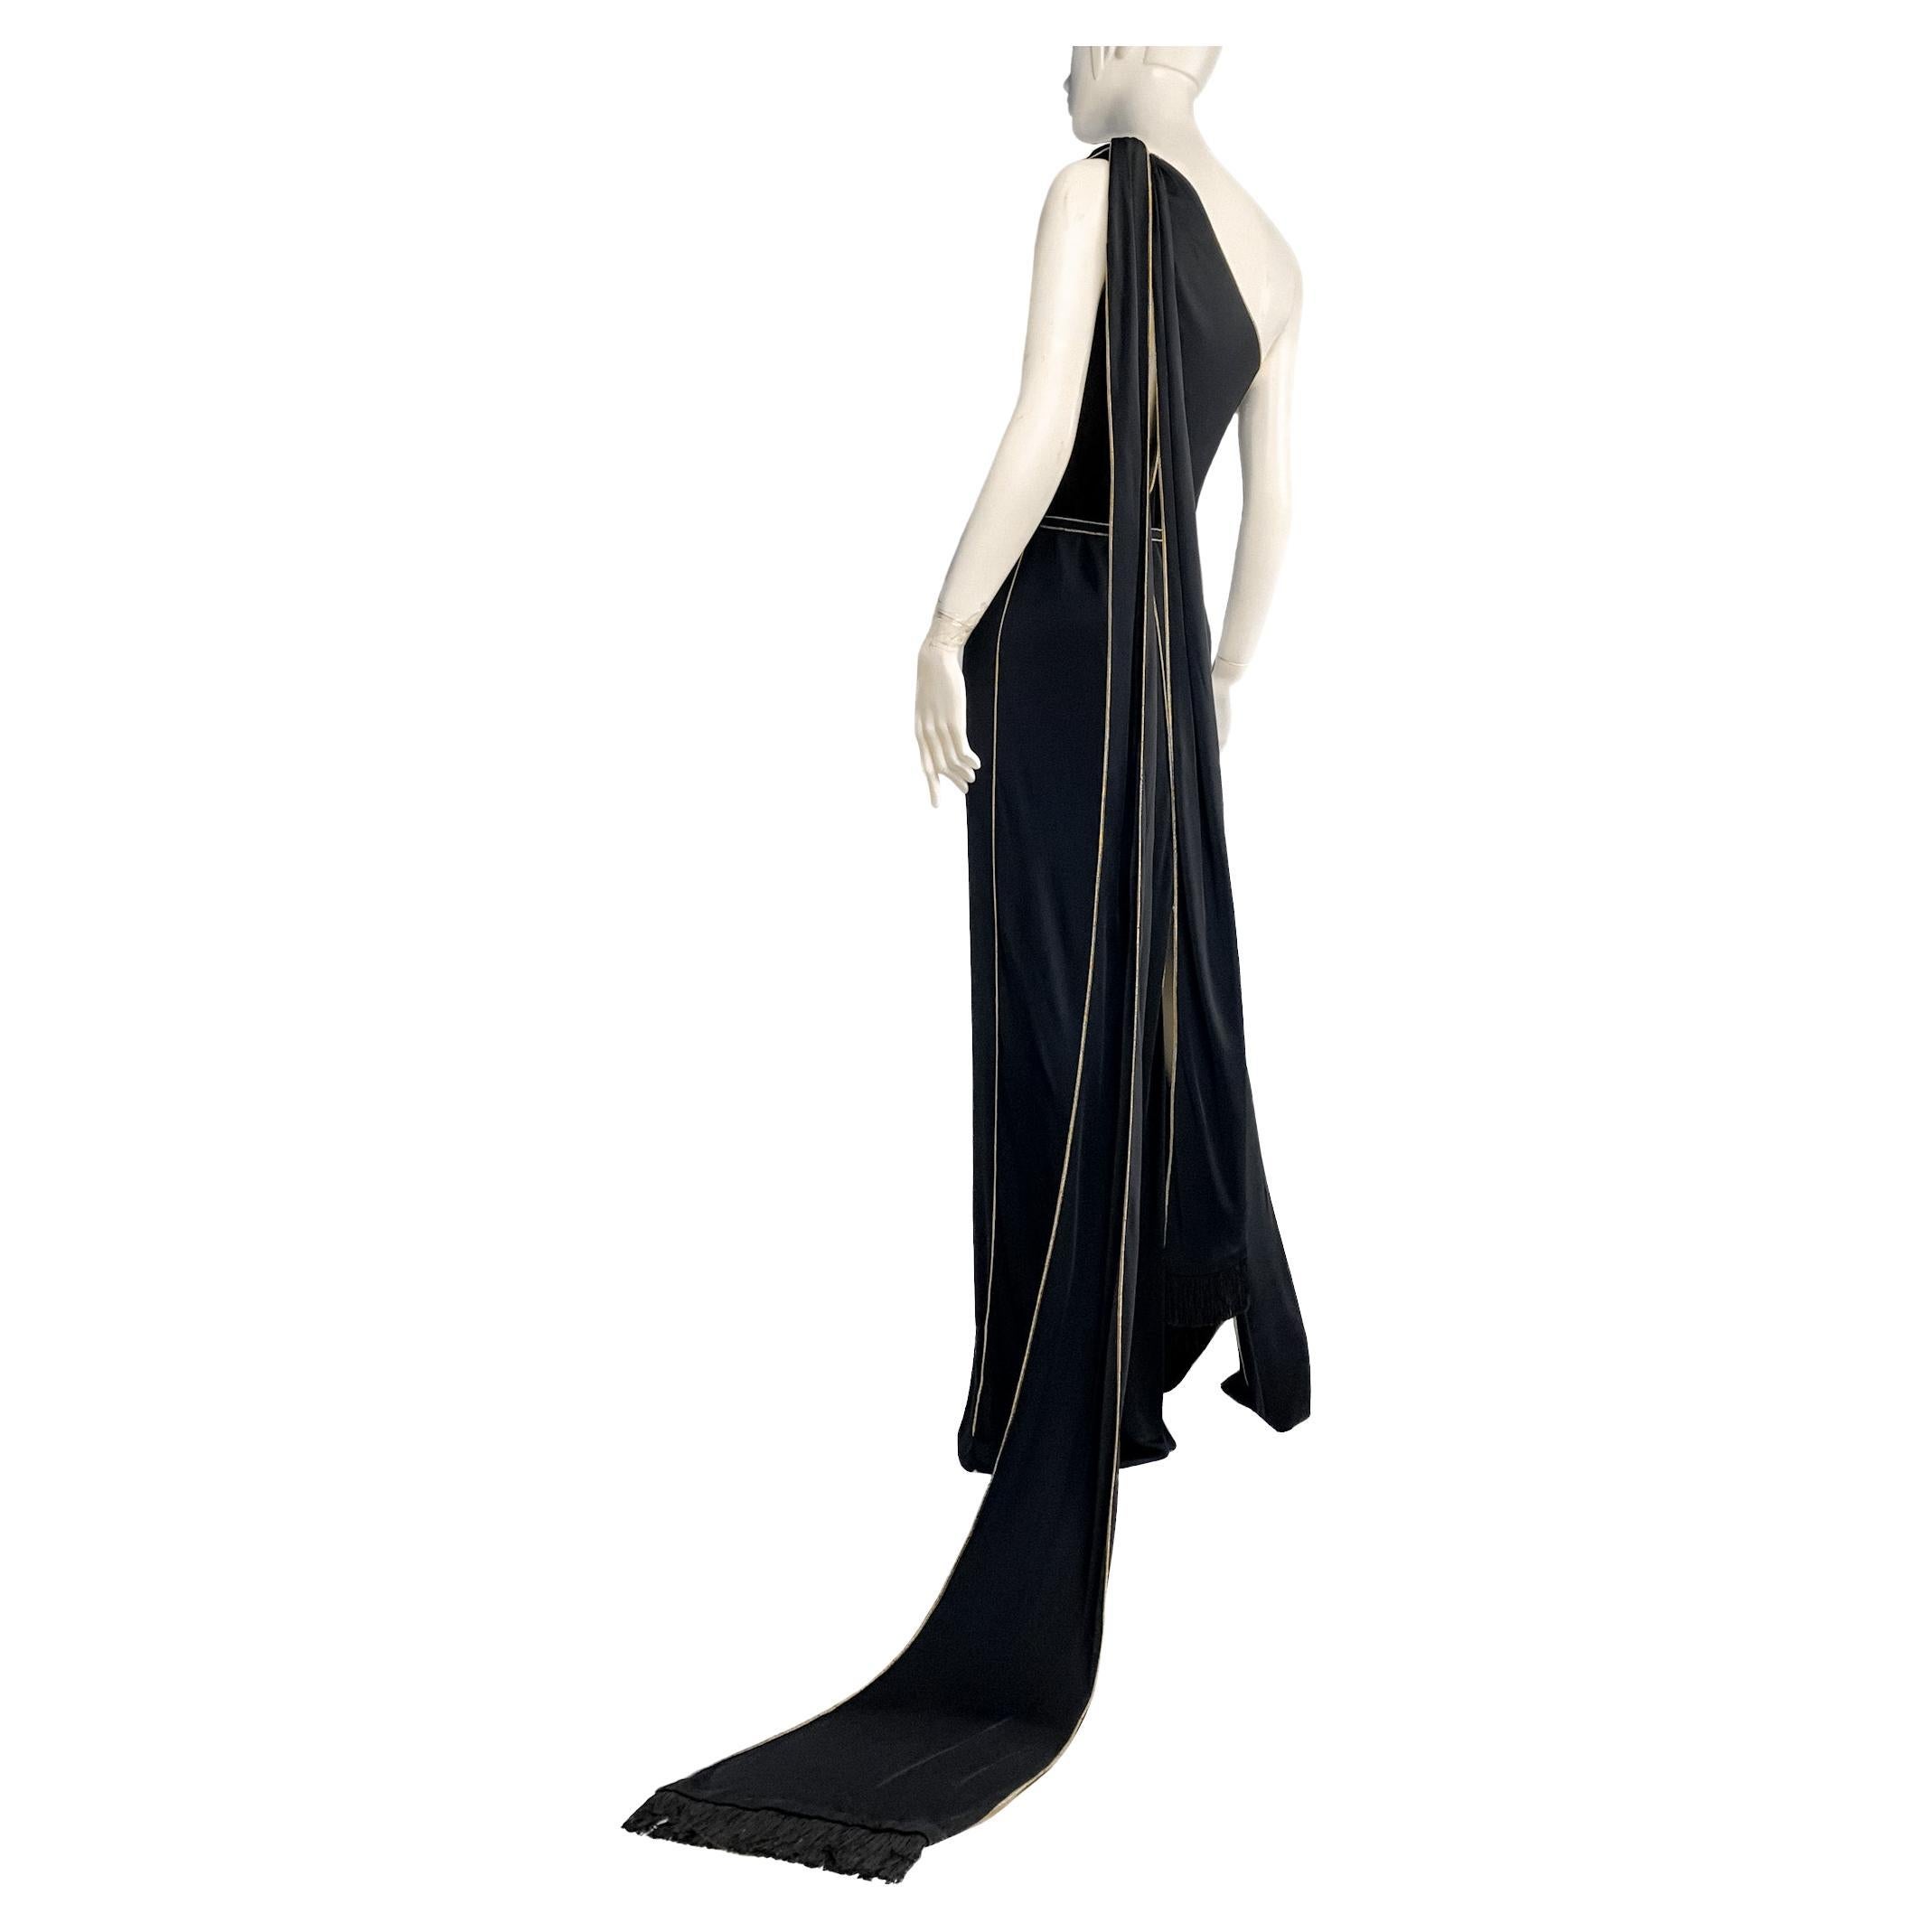 Gucci 2006 One-Shoulder Gown with Fringed Scarves/Train, Cutouts, Gold Topstitch